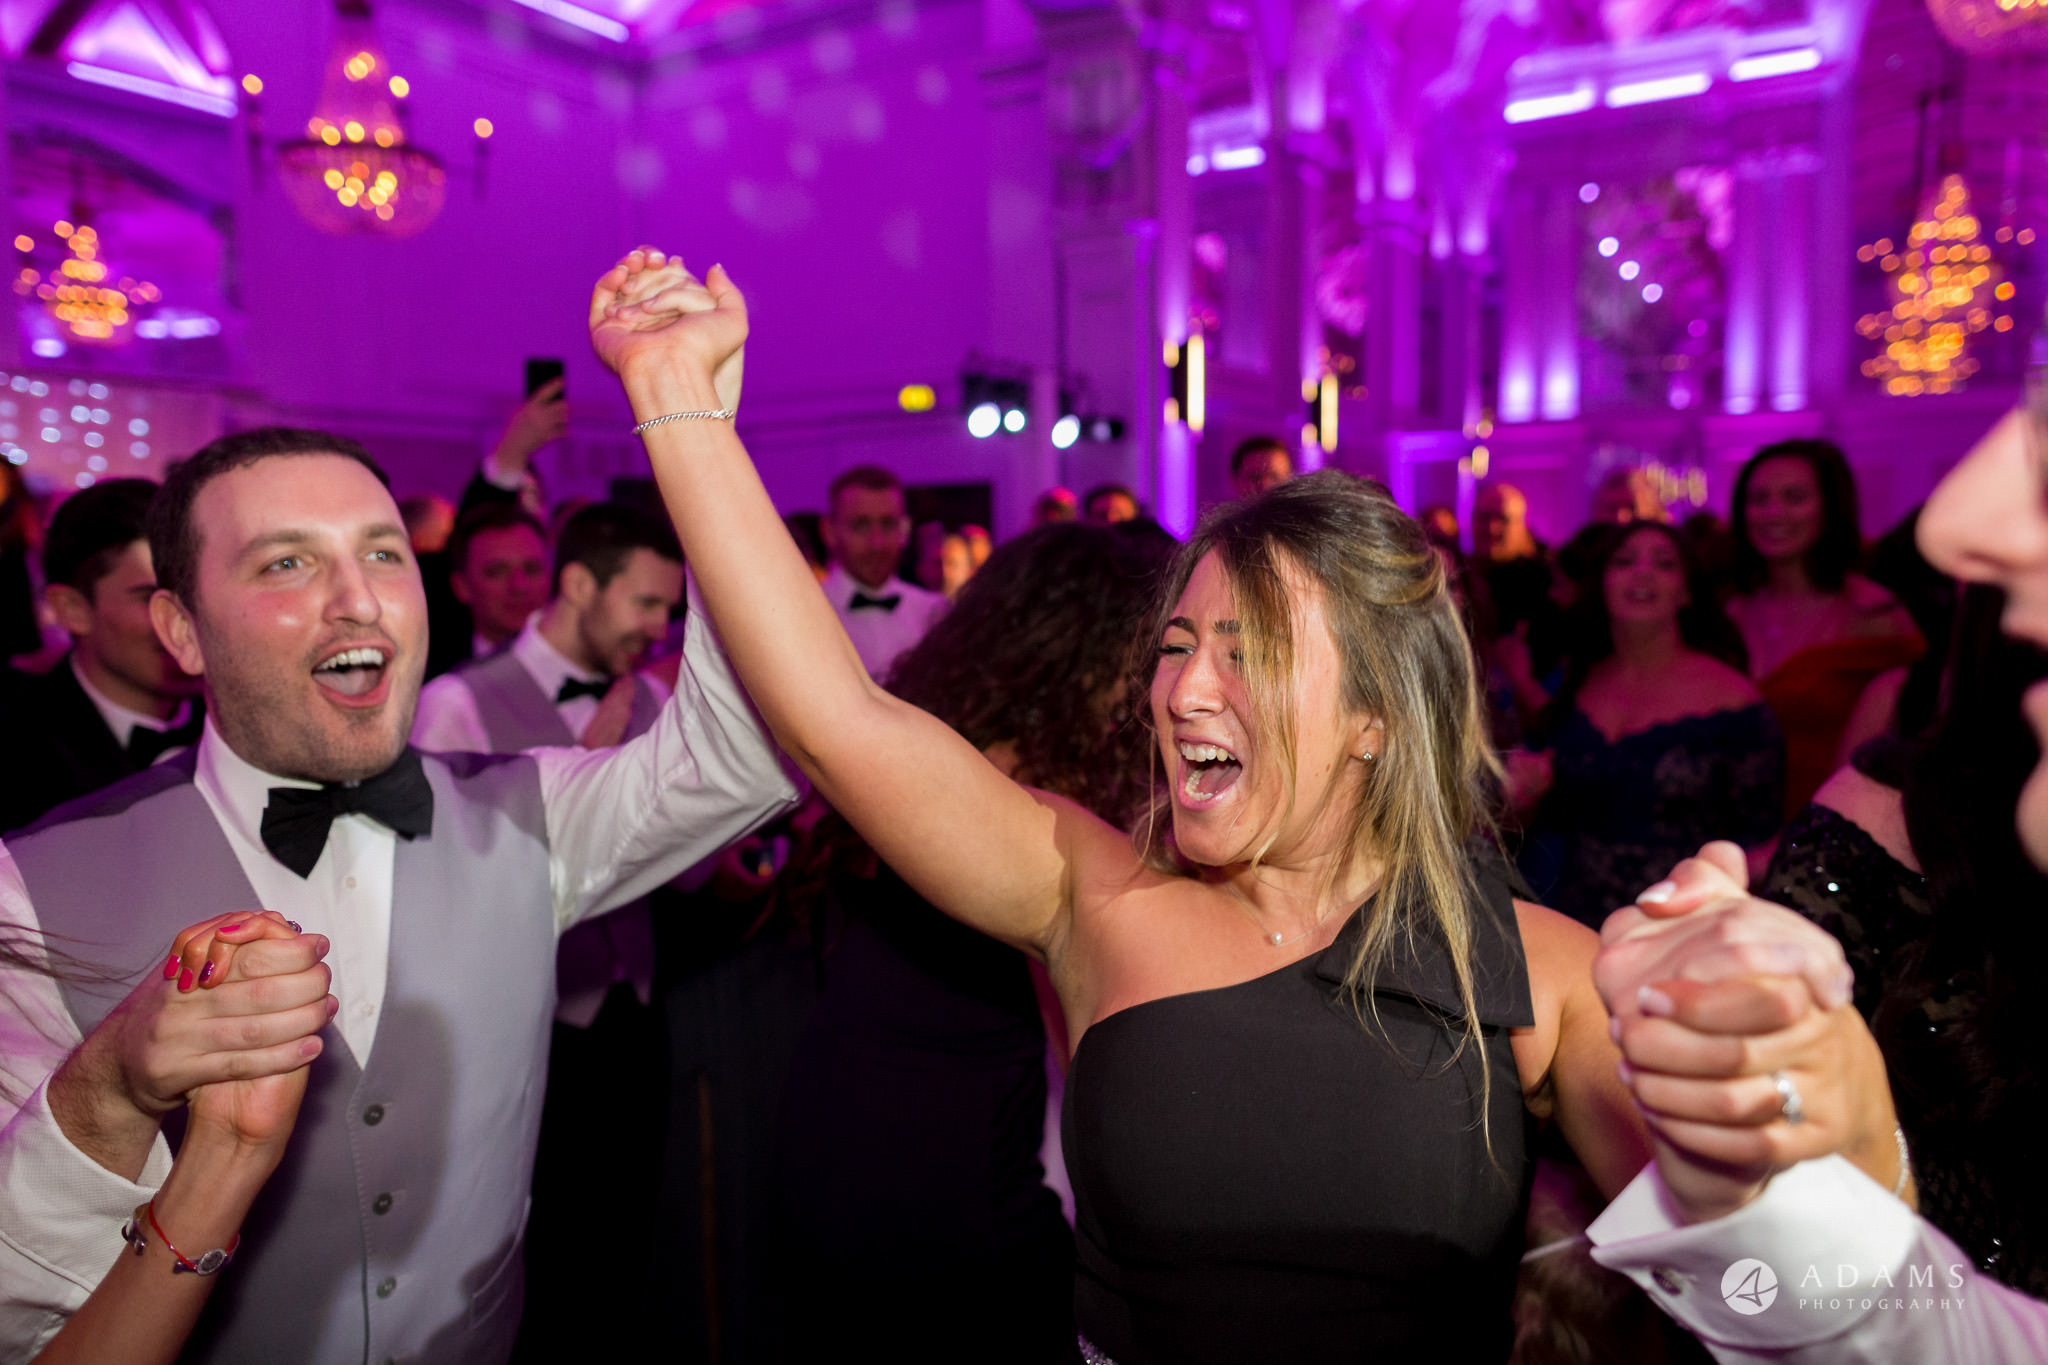 De Vere grand connaught rooms photographer guests have great time dancing